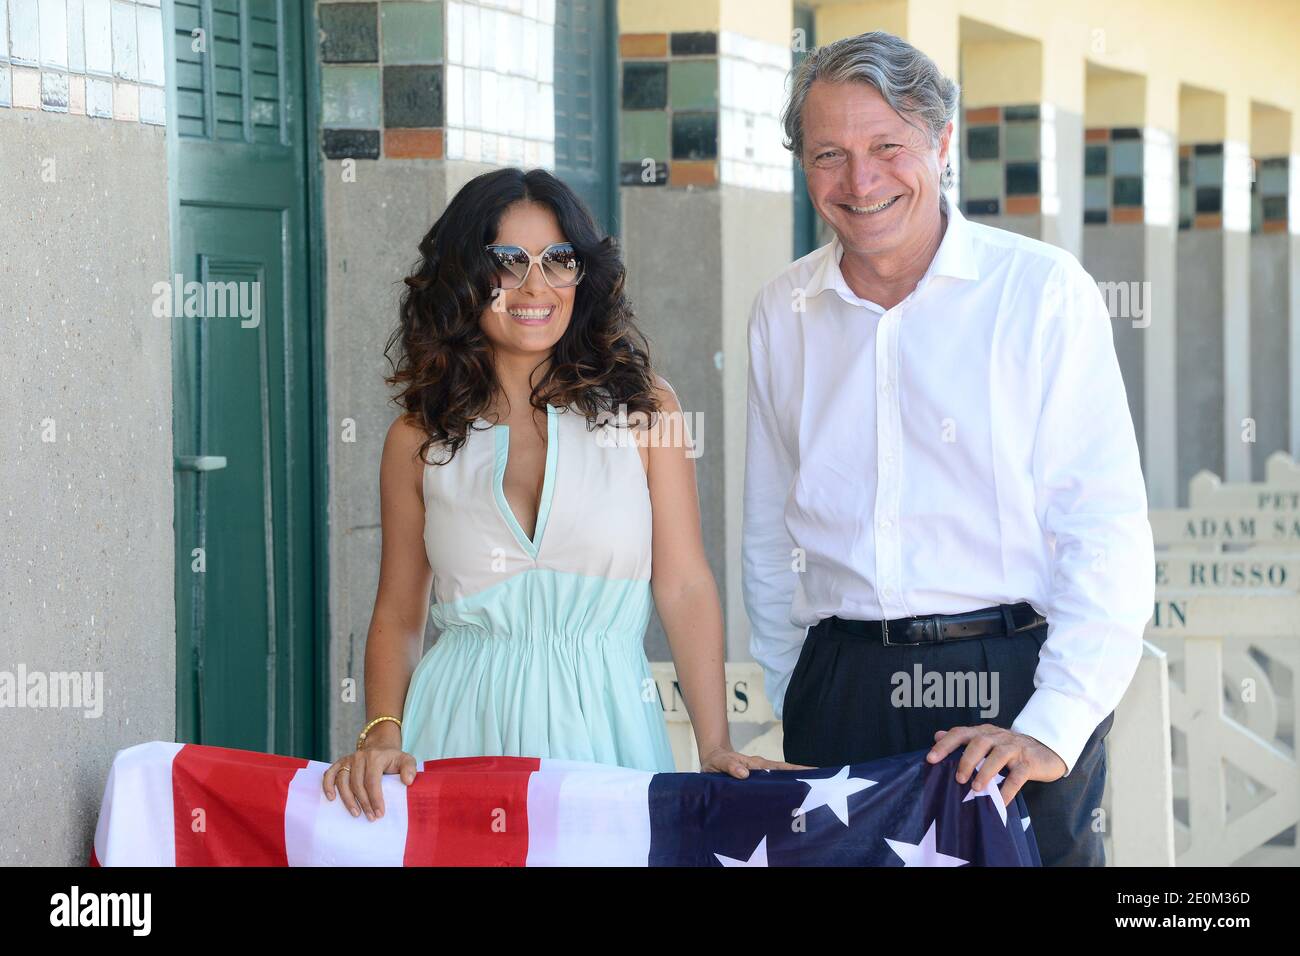 Salma Hayek poses along with Deauville Mayor Philippe Augier next to the beach closet dedicated to her on the Promenade des Planches as part of a special tribute for her lifetime achievement, during the 38th Deauville American Film Festival in Deauville, France on September 8, 2012. Photo by Nicolas Briquet/ABACAPRESS.COM Stock Photo